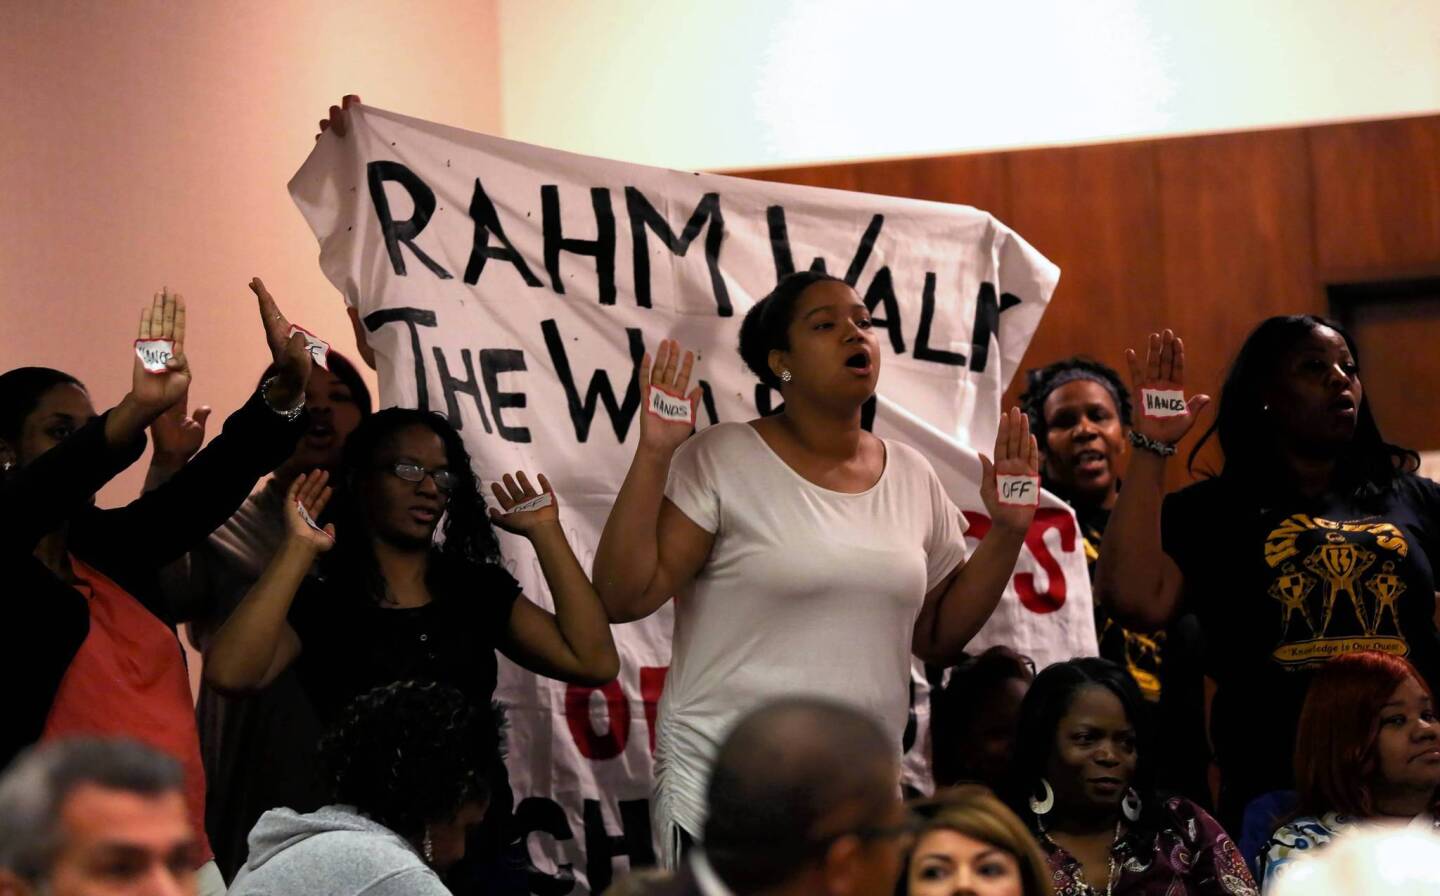 Demonstrators from Walk the Walk interrupt a City Council meeting to shout slogans concerning upcoming school closings. The group was ushered out of the chambers.